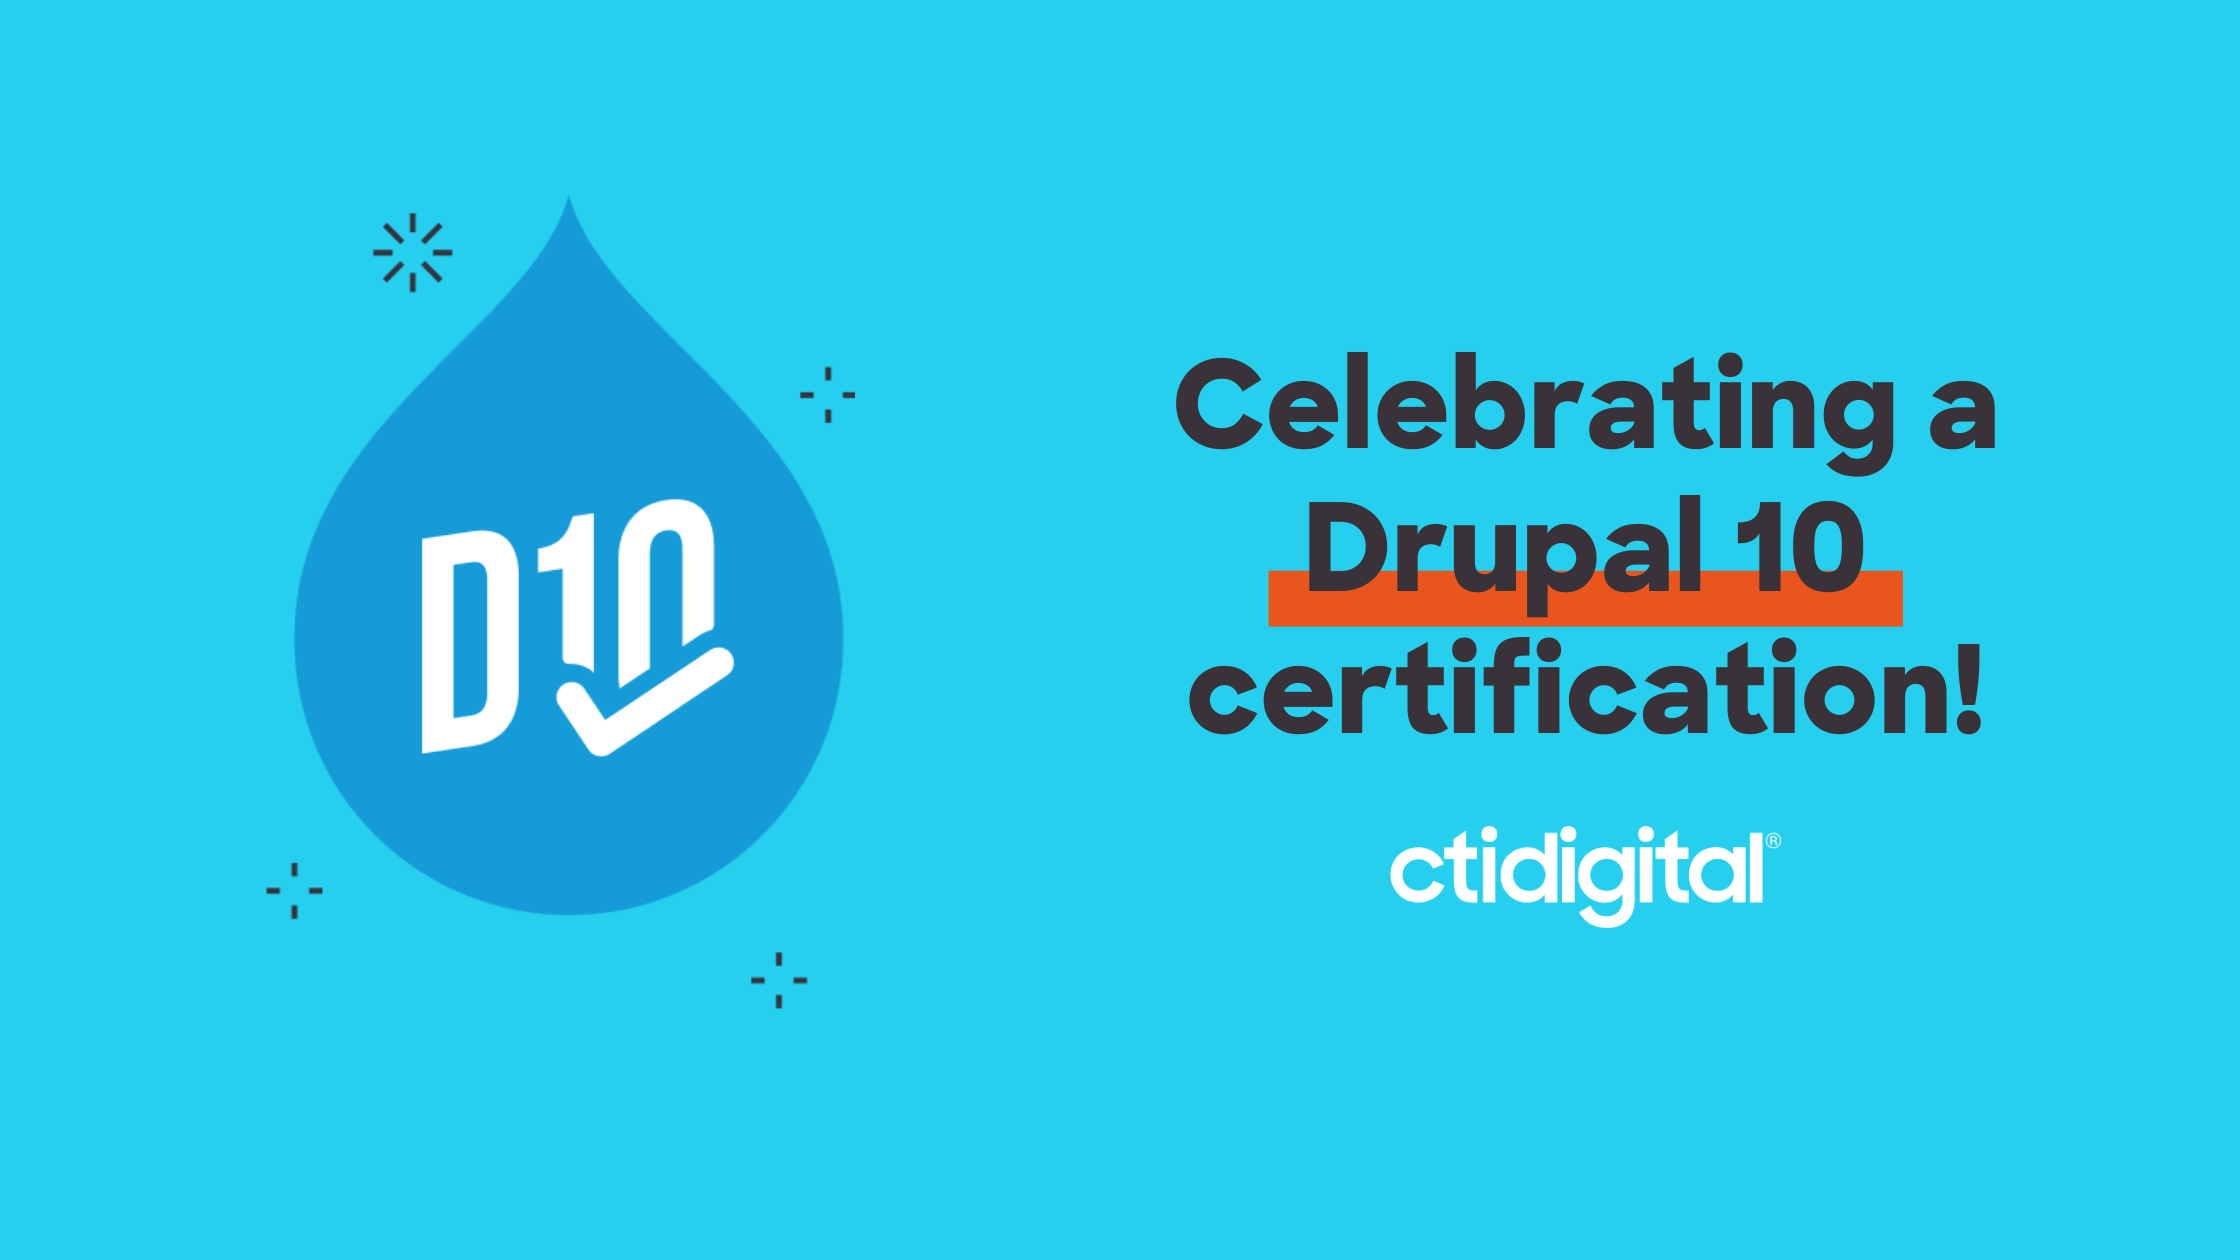 One of our developer's shines with Acquia's Drupal 10 certified site builder certification